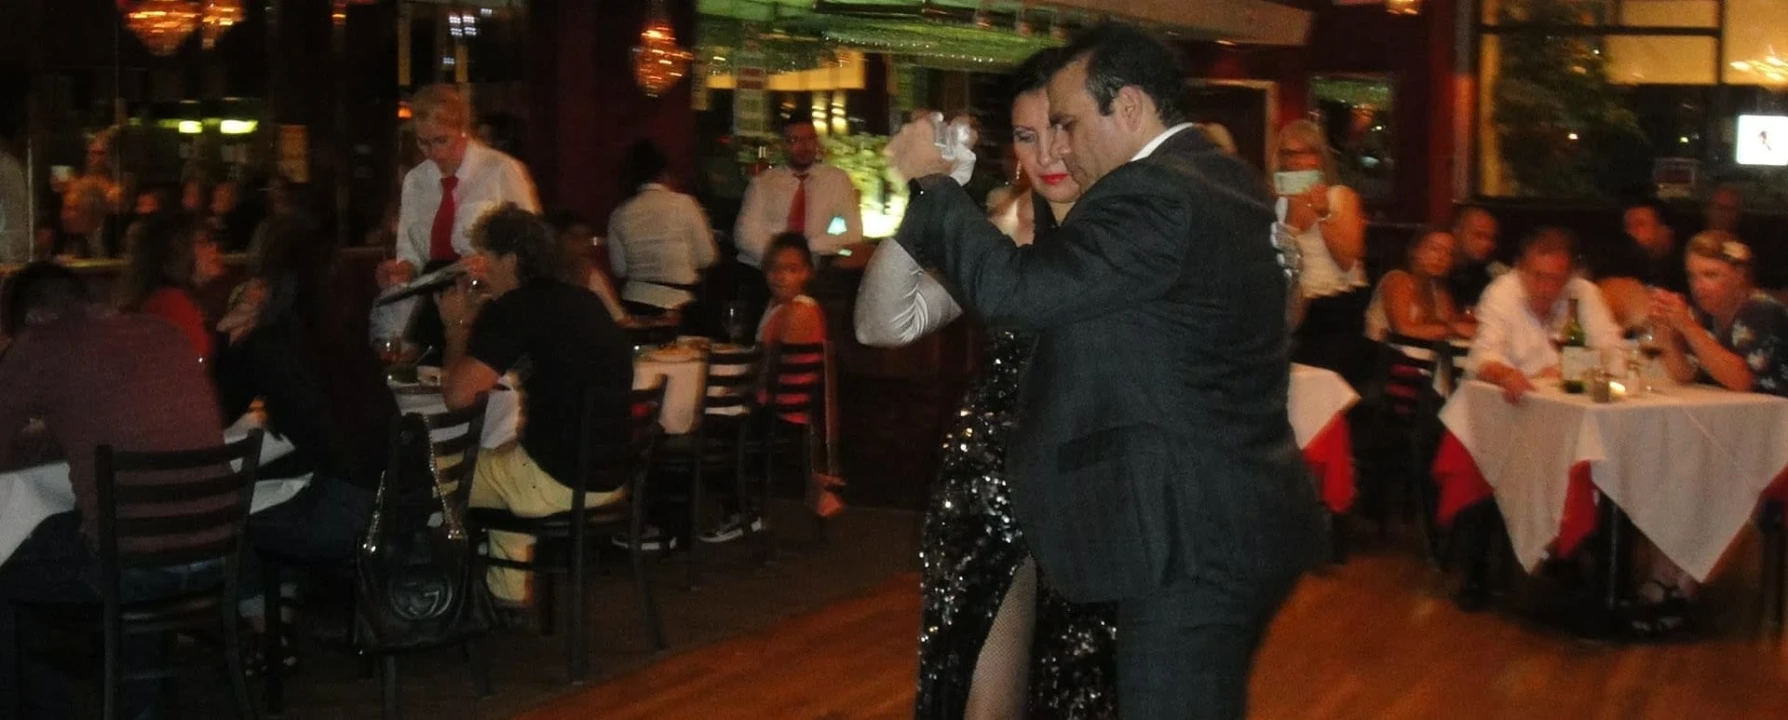 New Year’s Eve Tango date Sunday Dec 31st 2023: What to expect - 1